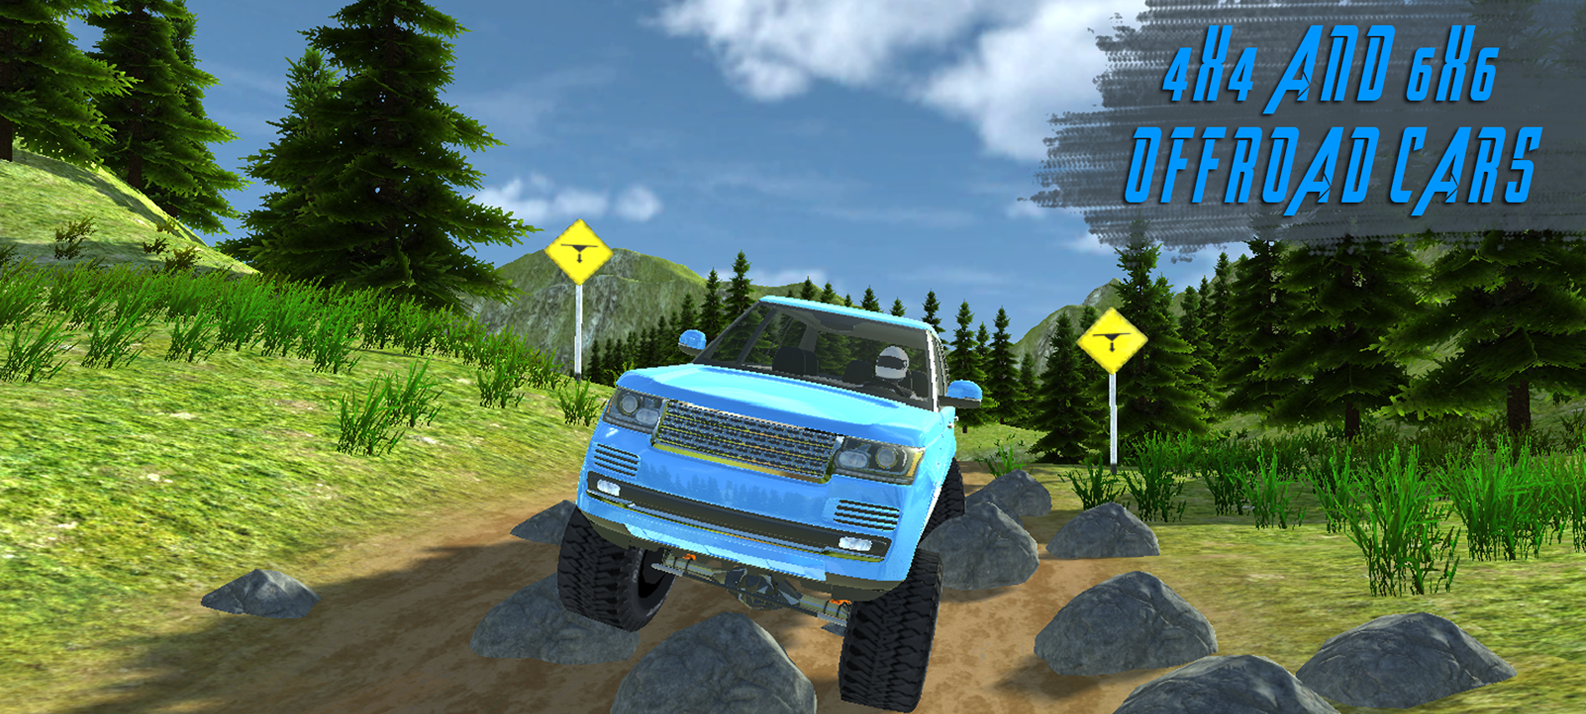 Screenshot 1 of Eagle Offroad 3D 逼真關閉 1.0.35